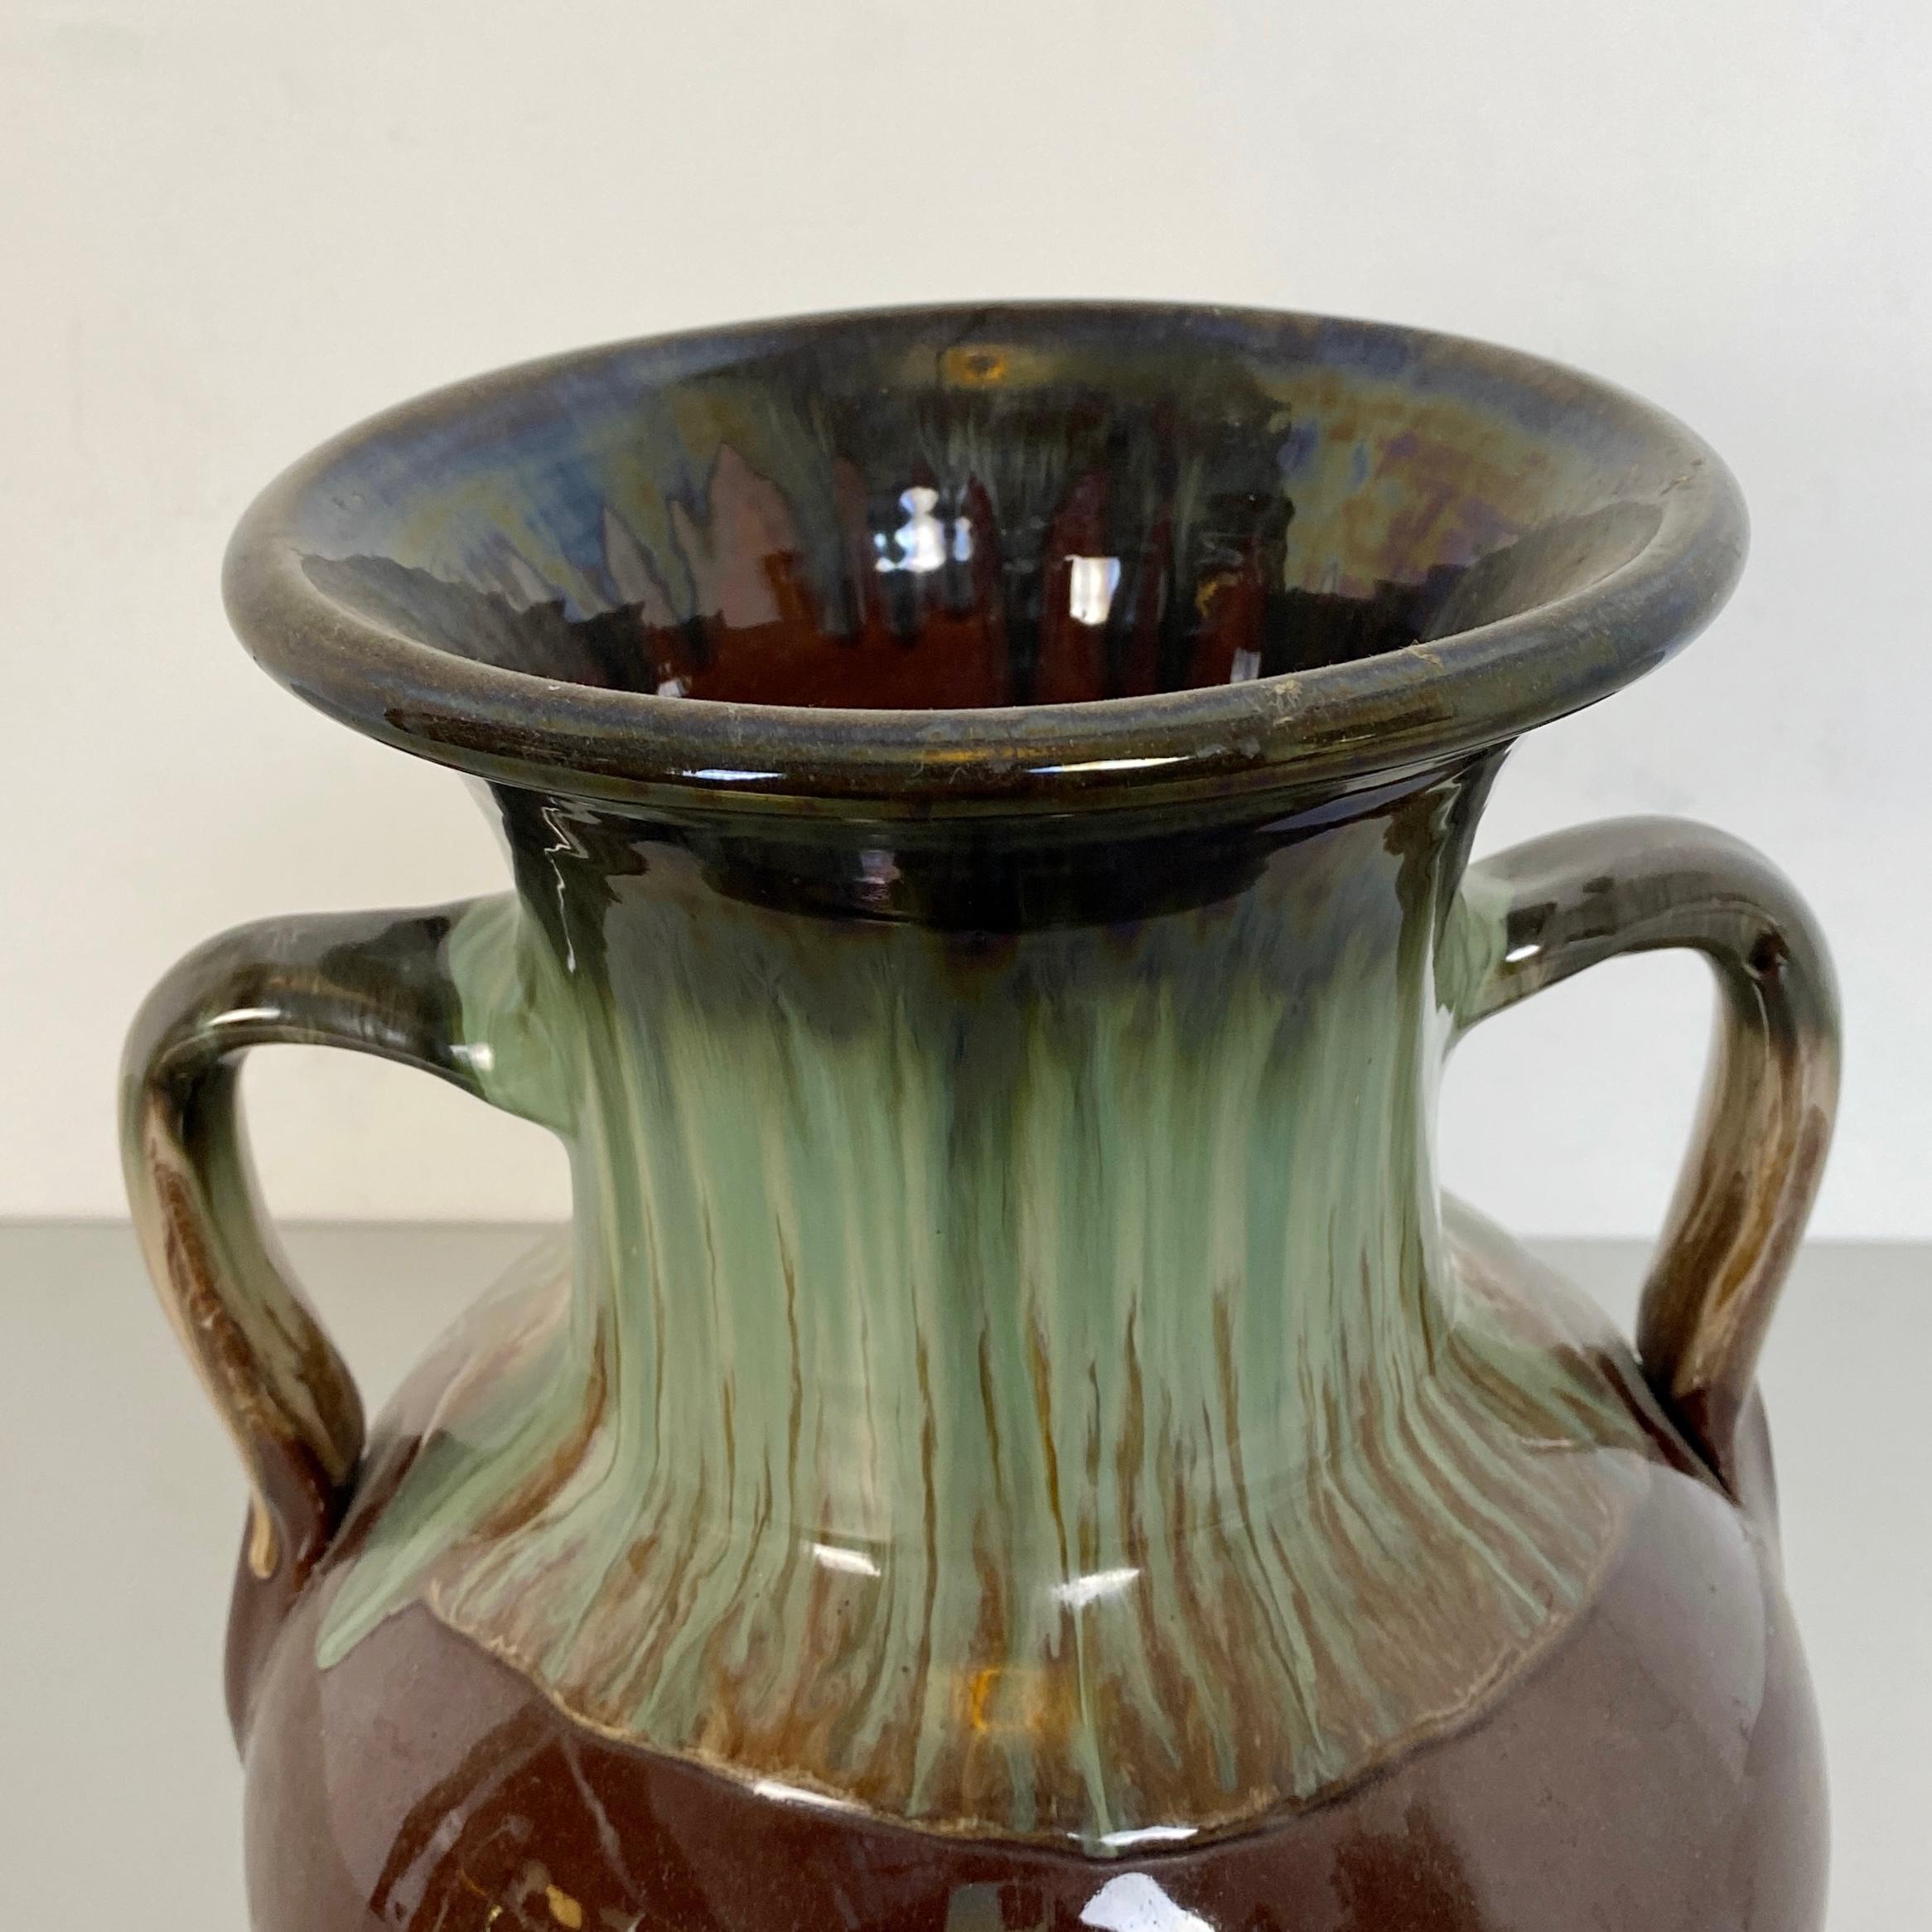 Italian Mid-Century Modern Green and Brown Glazed Ceramic Amphora, 1960s For Sale 3